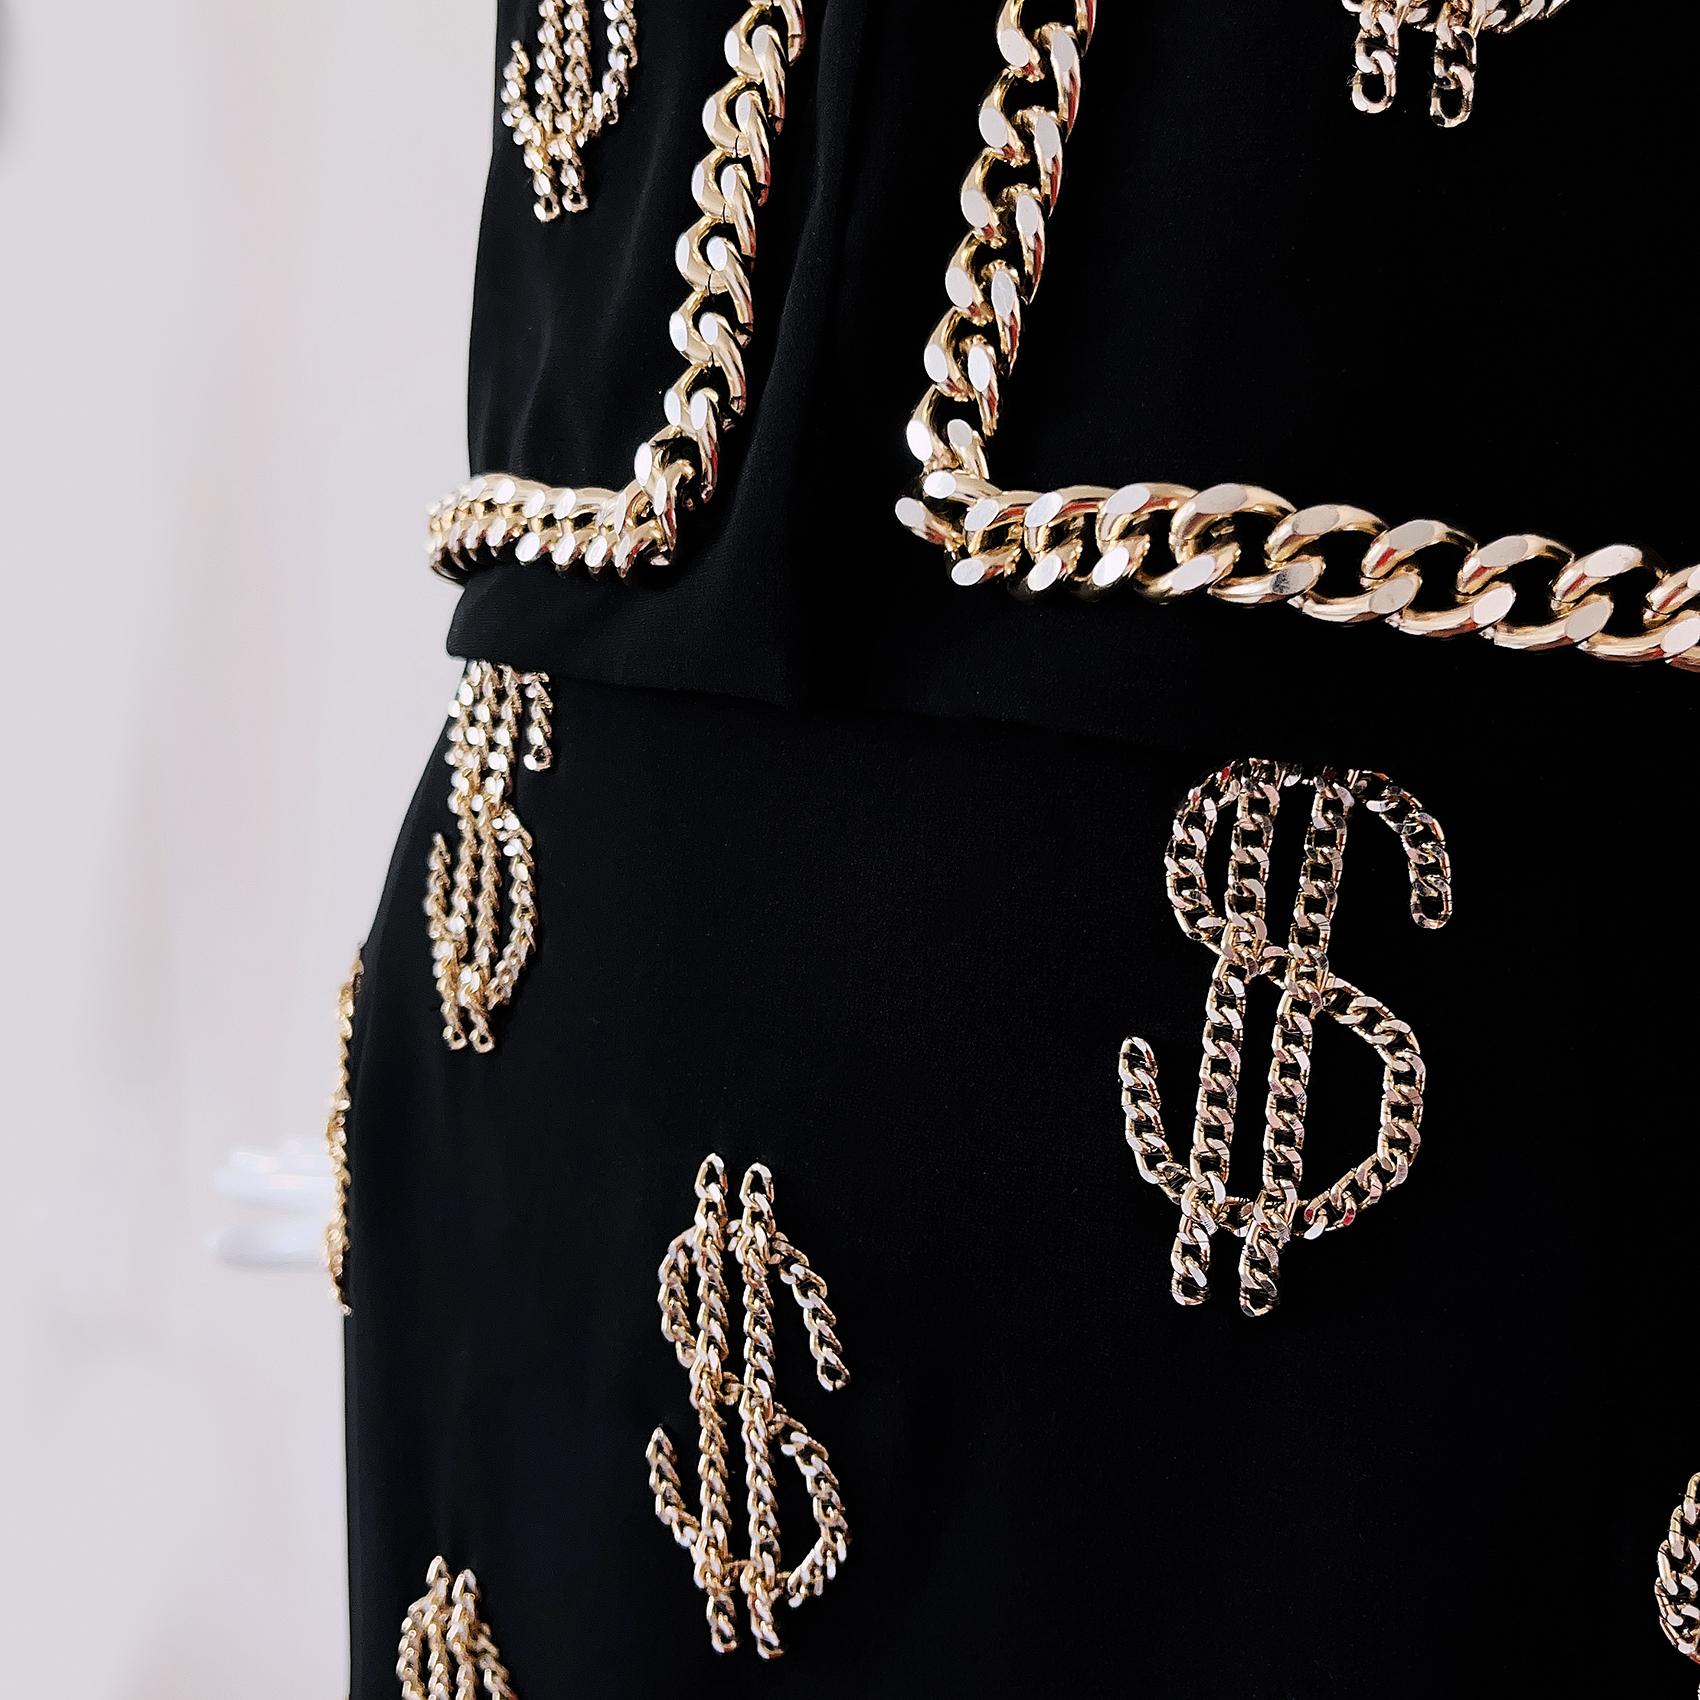 Iconic MOSCHINO Couture Dollar Sign Ensembe Black Dress Jacket Gold Chain Set  In Excellent Condition For Sale In Berlin, BE